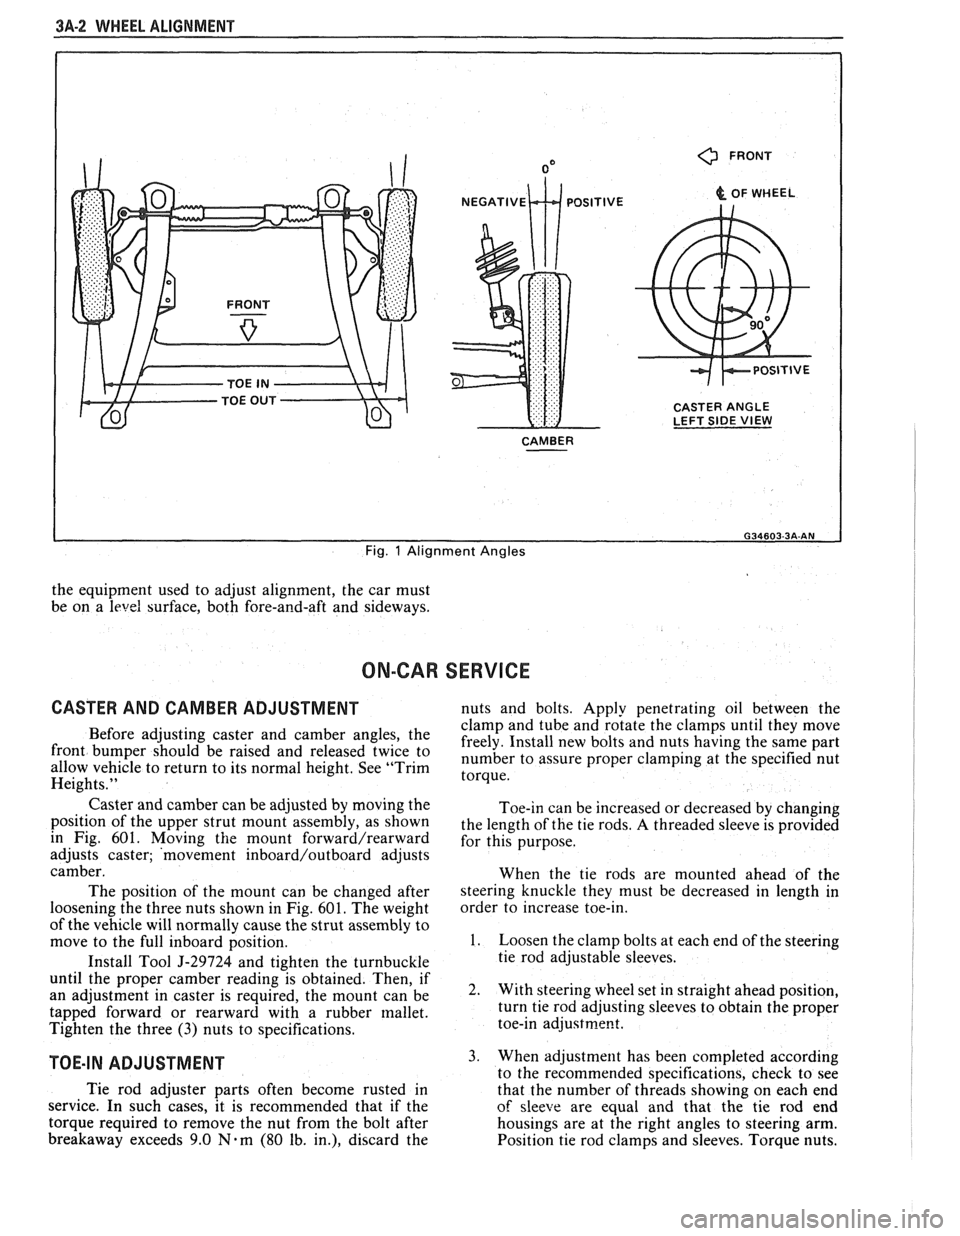 PONTIAC FIERO 1988  Service Repair Manual 
3A-2 WHEEL  ALIGNMENT 
0 FRONT 
& OF WHEEL 
CASTER  ANGLE 
LEFT  SIDE 
VIEW 
CAMBER 
I 
Fig. 1 Alignment  Angles 
the equipment  used to adjust  alignment,  the  car must 
be  on  a 
level surface,  